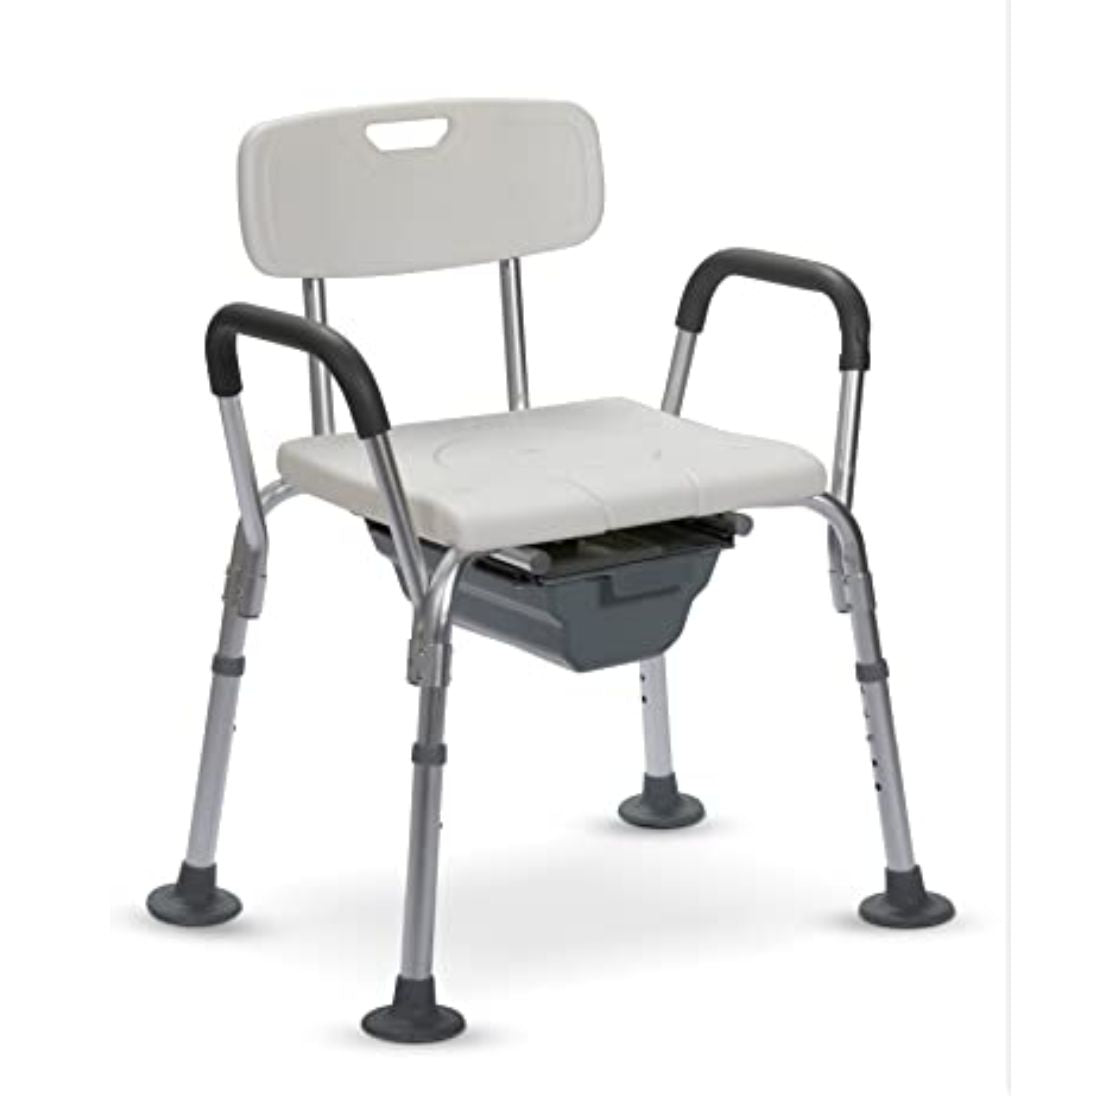 Bath Chair | Commode Chair - Multi Purpose Commode Chair